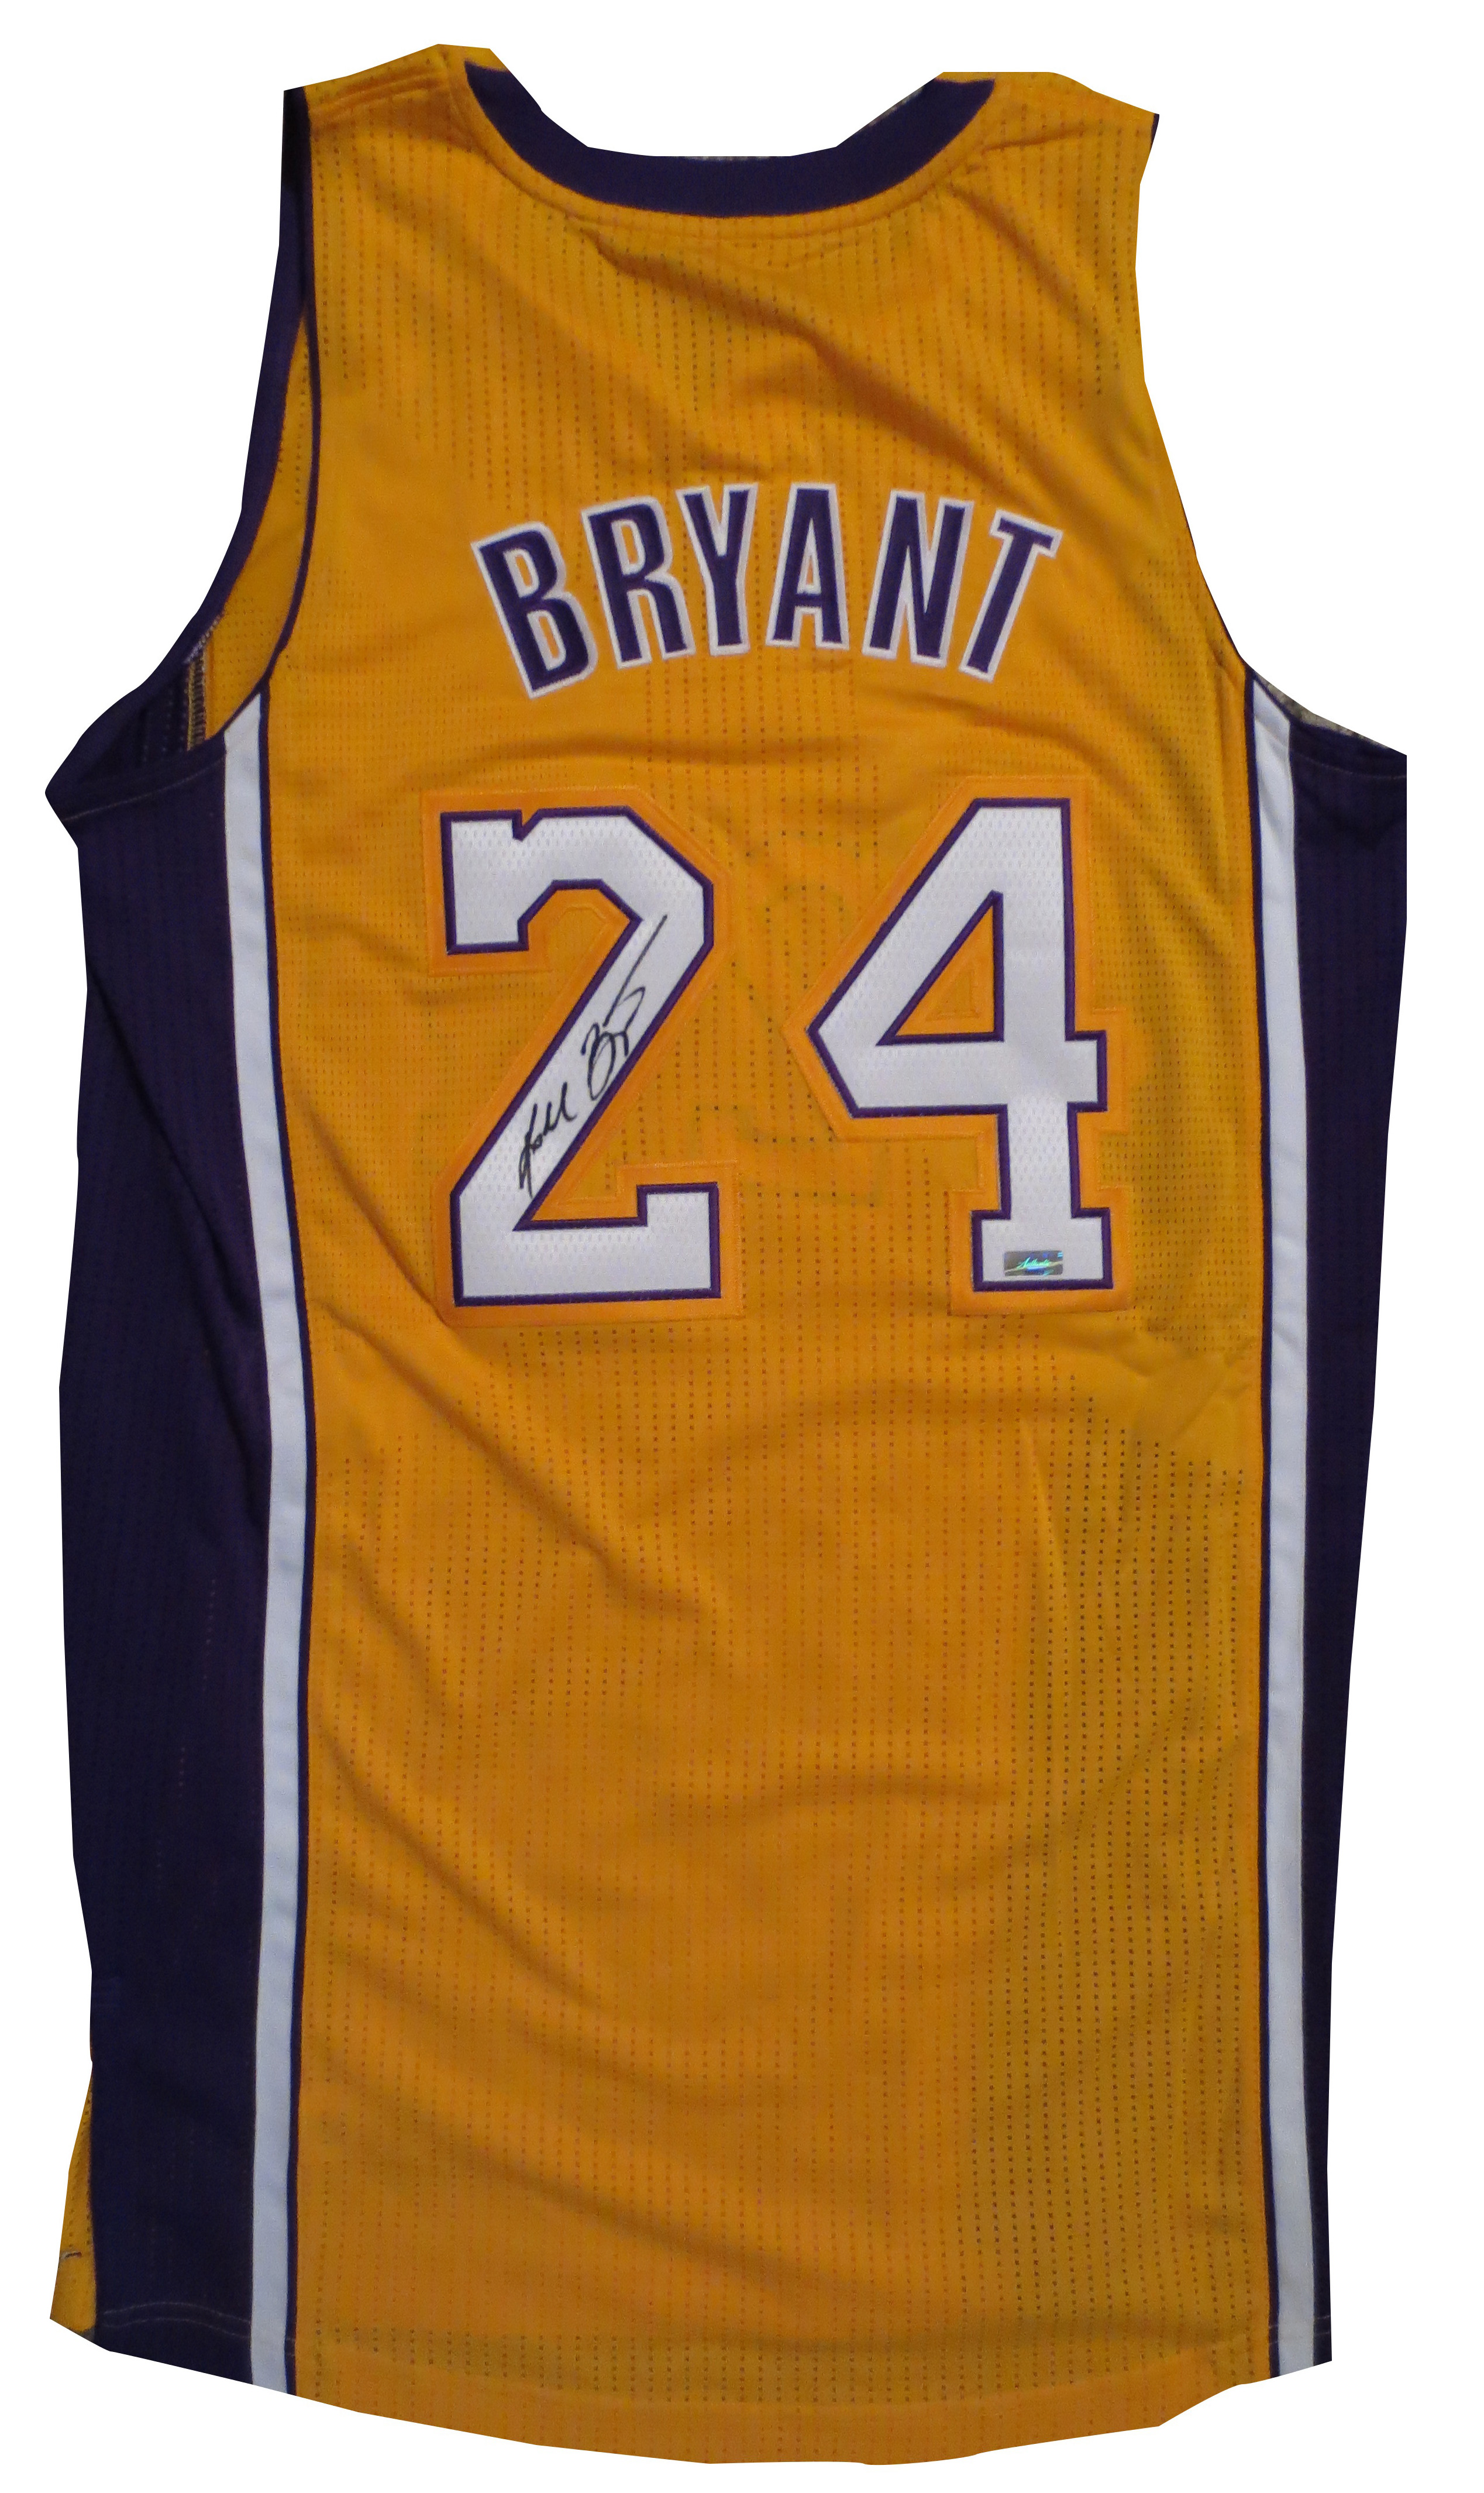 autographed kobe bryant jersey Off 51% - www.bashhguidelines.org